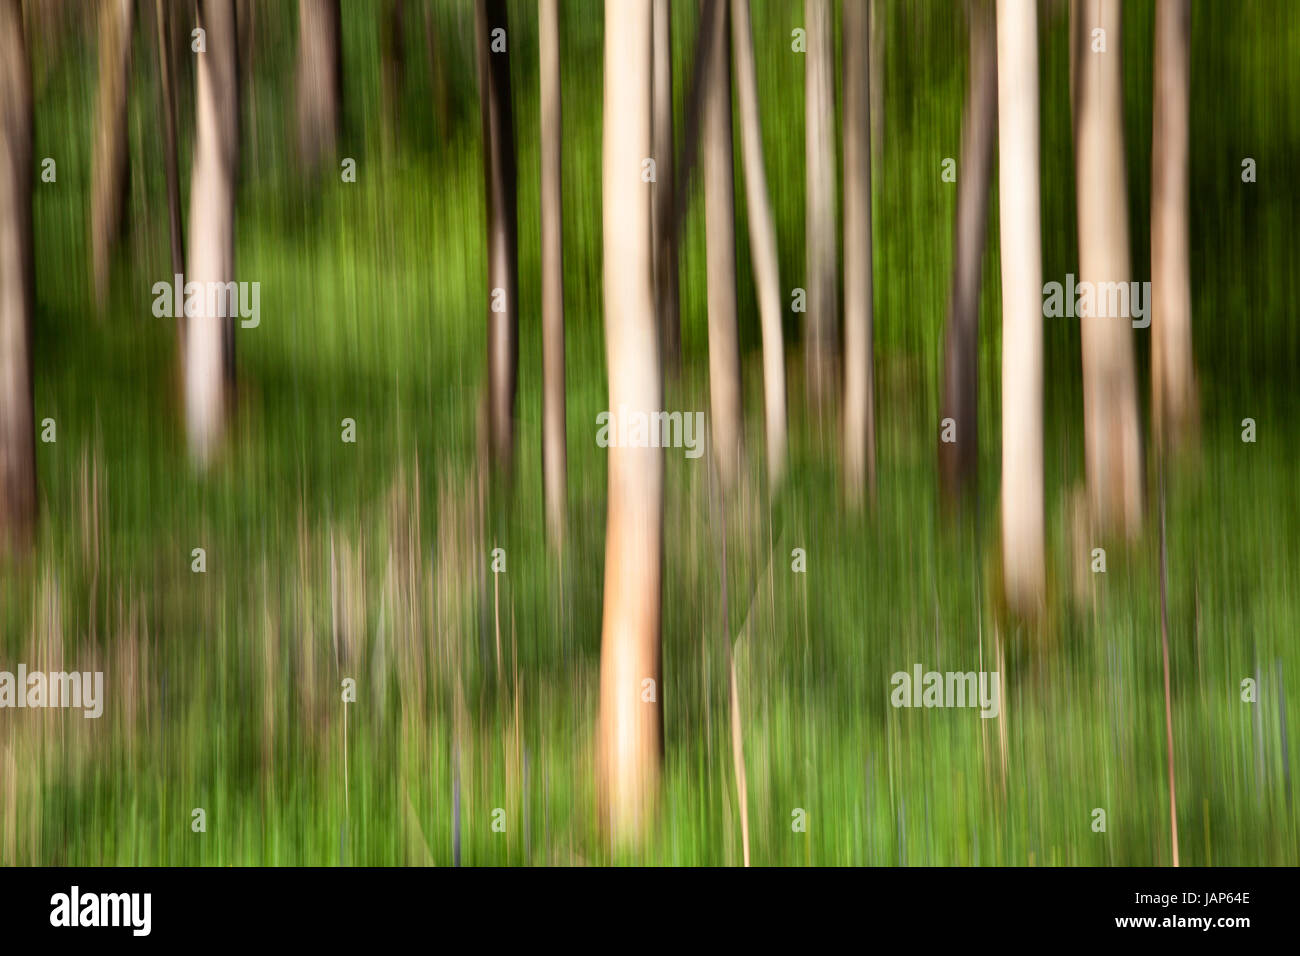 ICM, Intentional Camera Movement in Strid Woods, Bolton Abbey Estate, Wharfedale, Yorkshire Dales Stock Photo